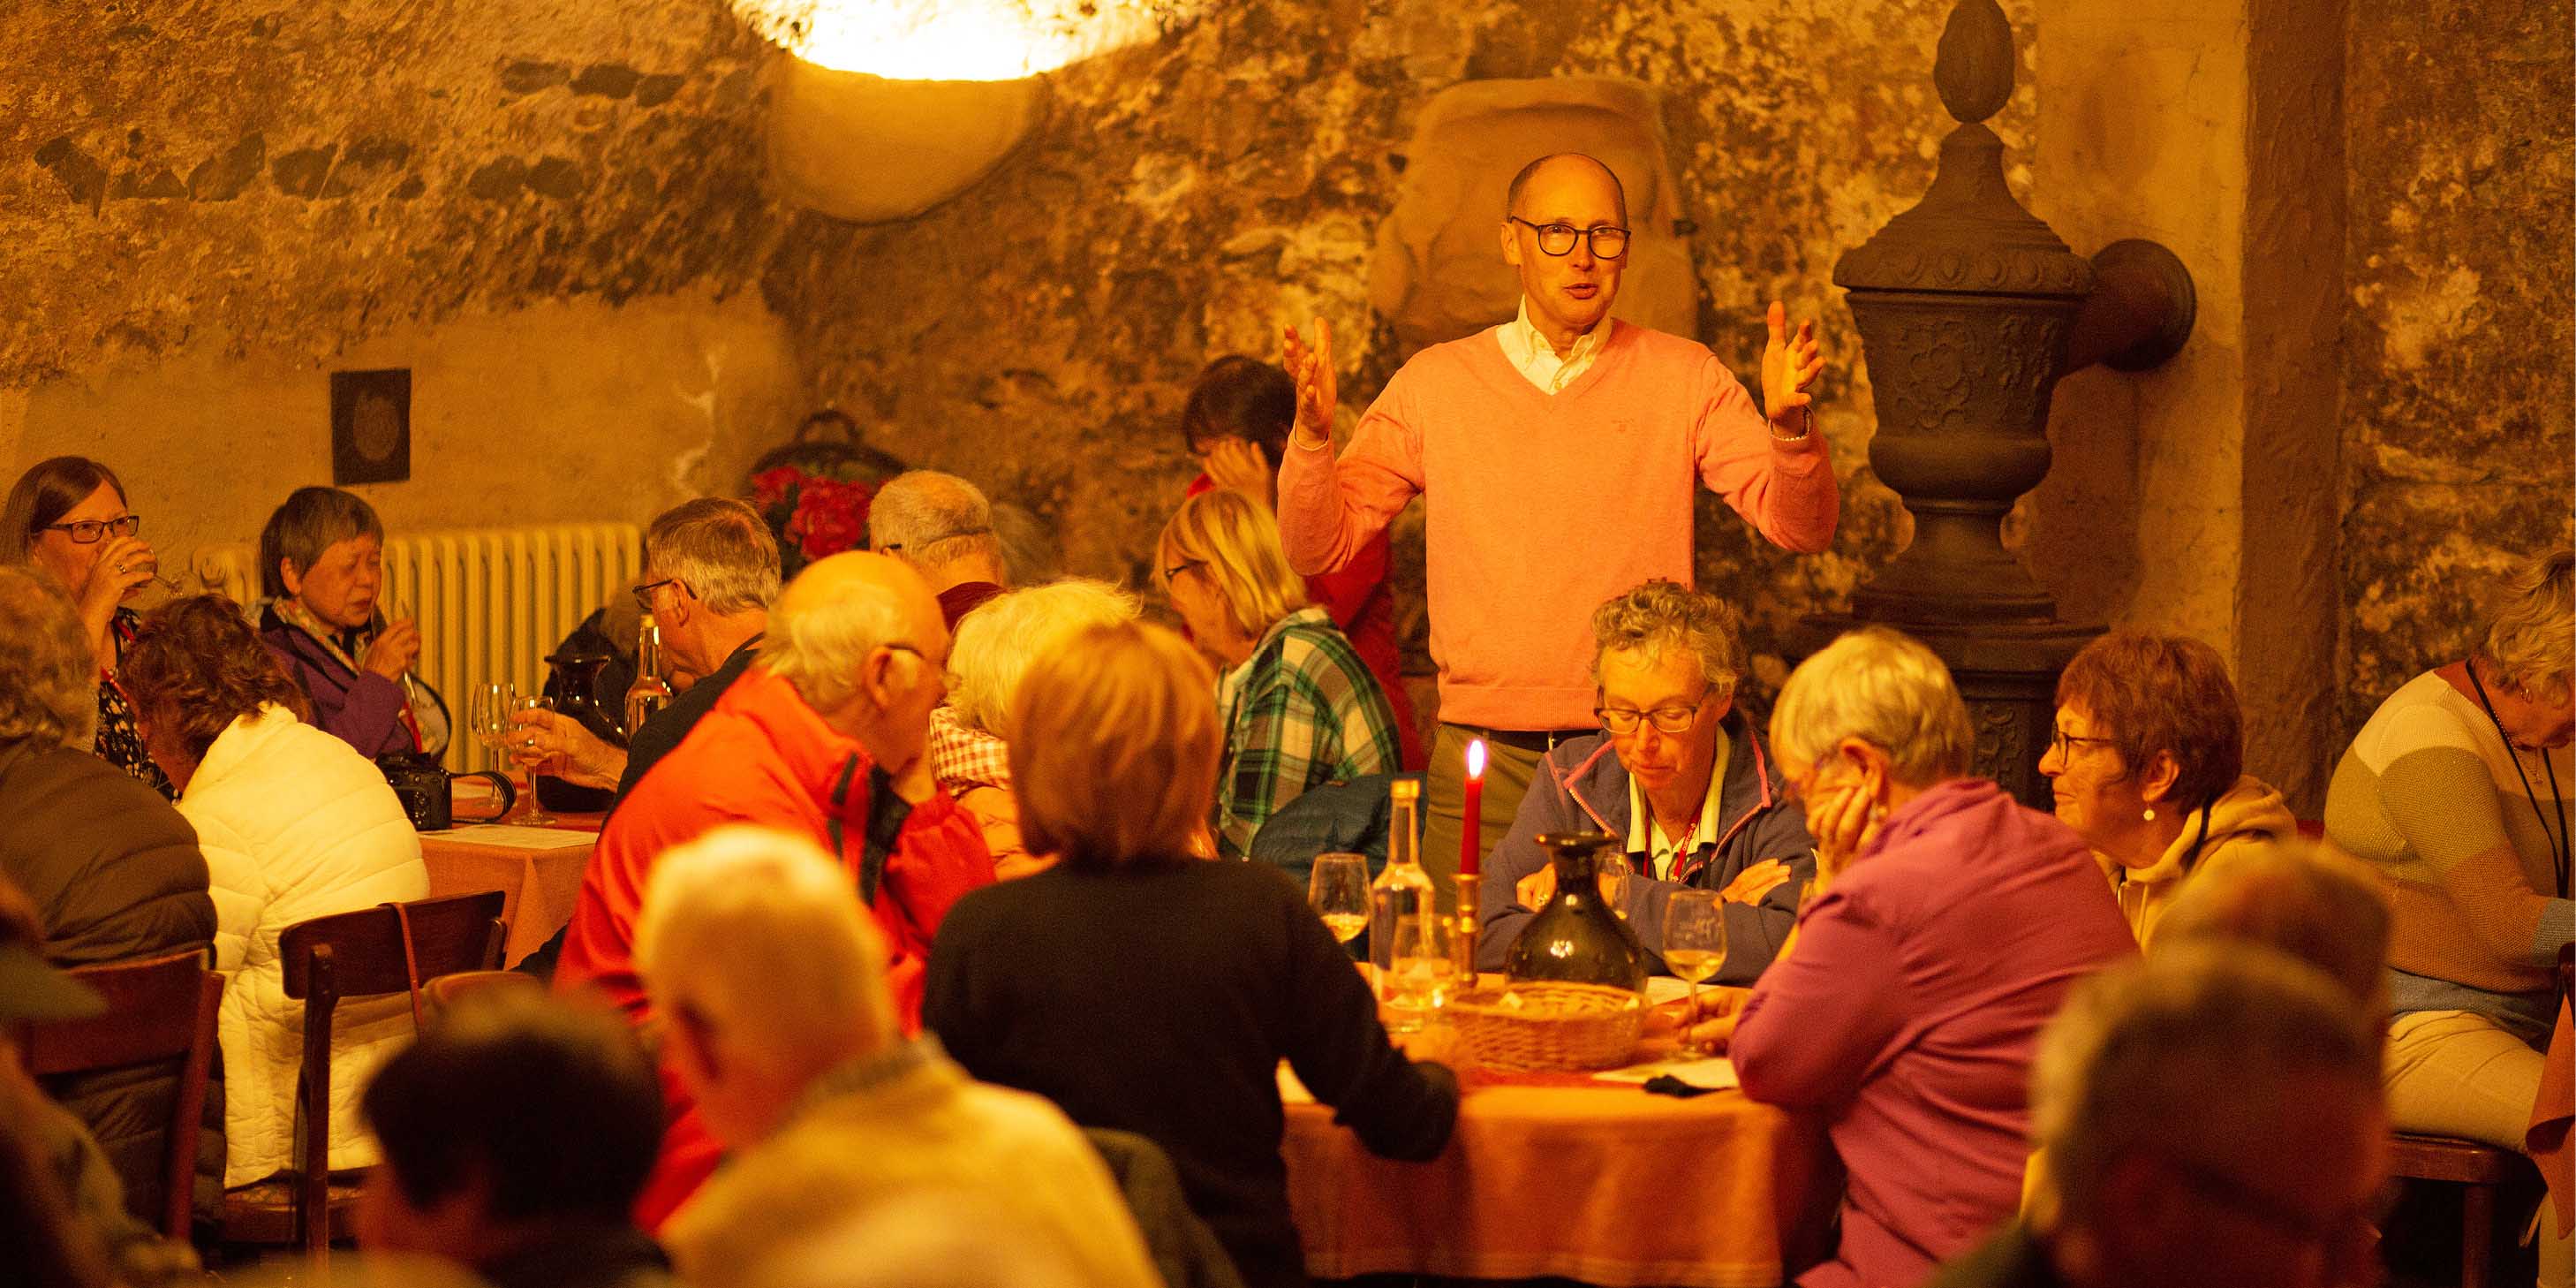 Wine connoisseur hosting a wine tour and tasting session in Bernkastel wine cellar, with many guests seated in the ambiently lit space